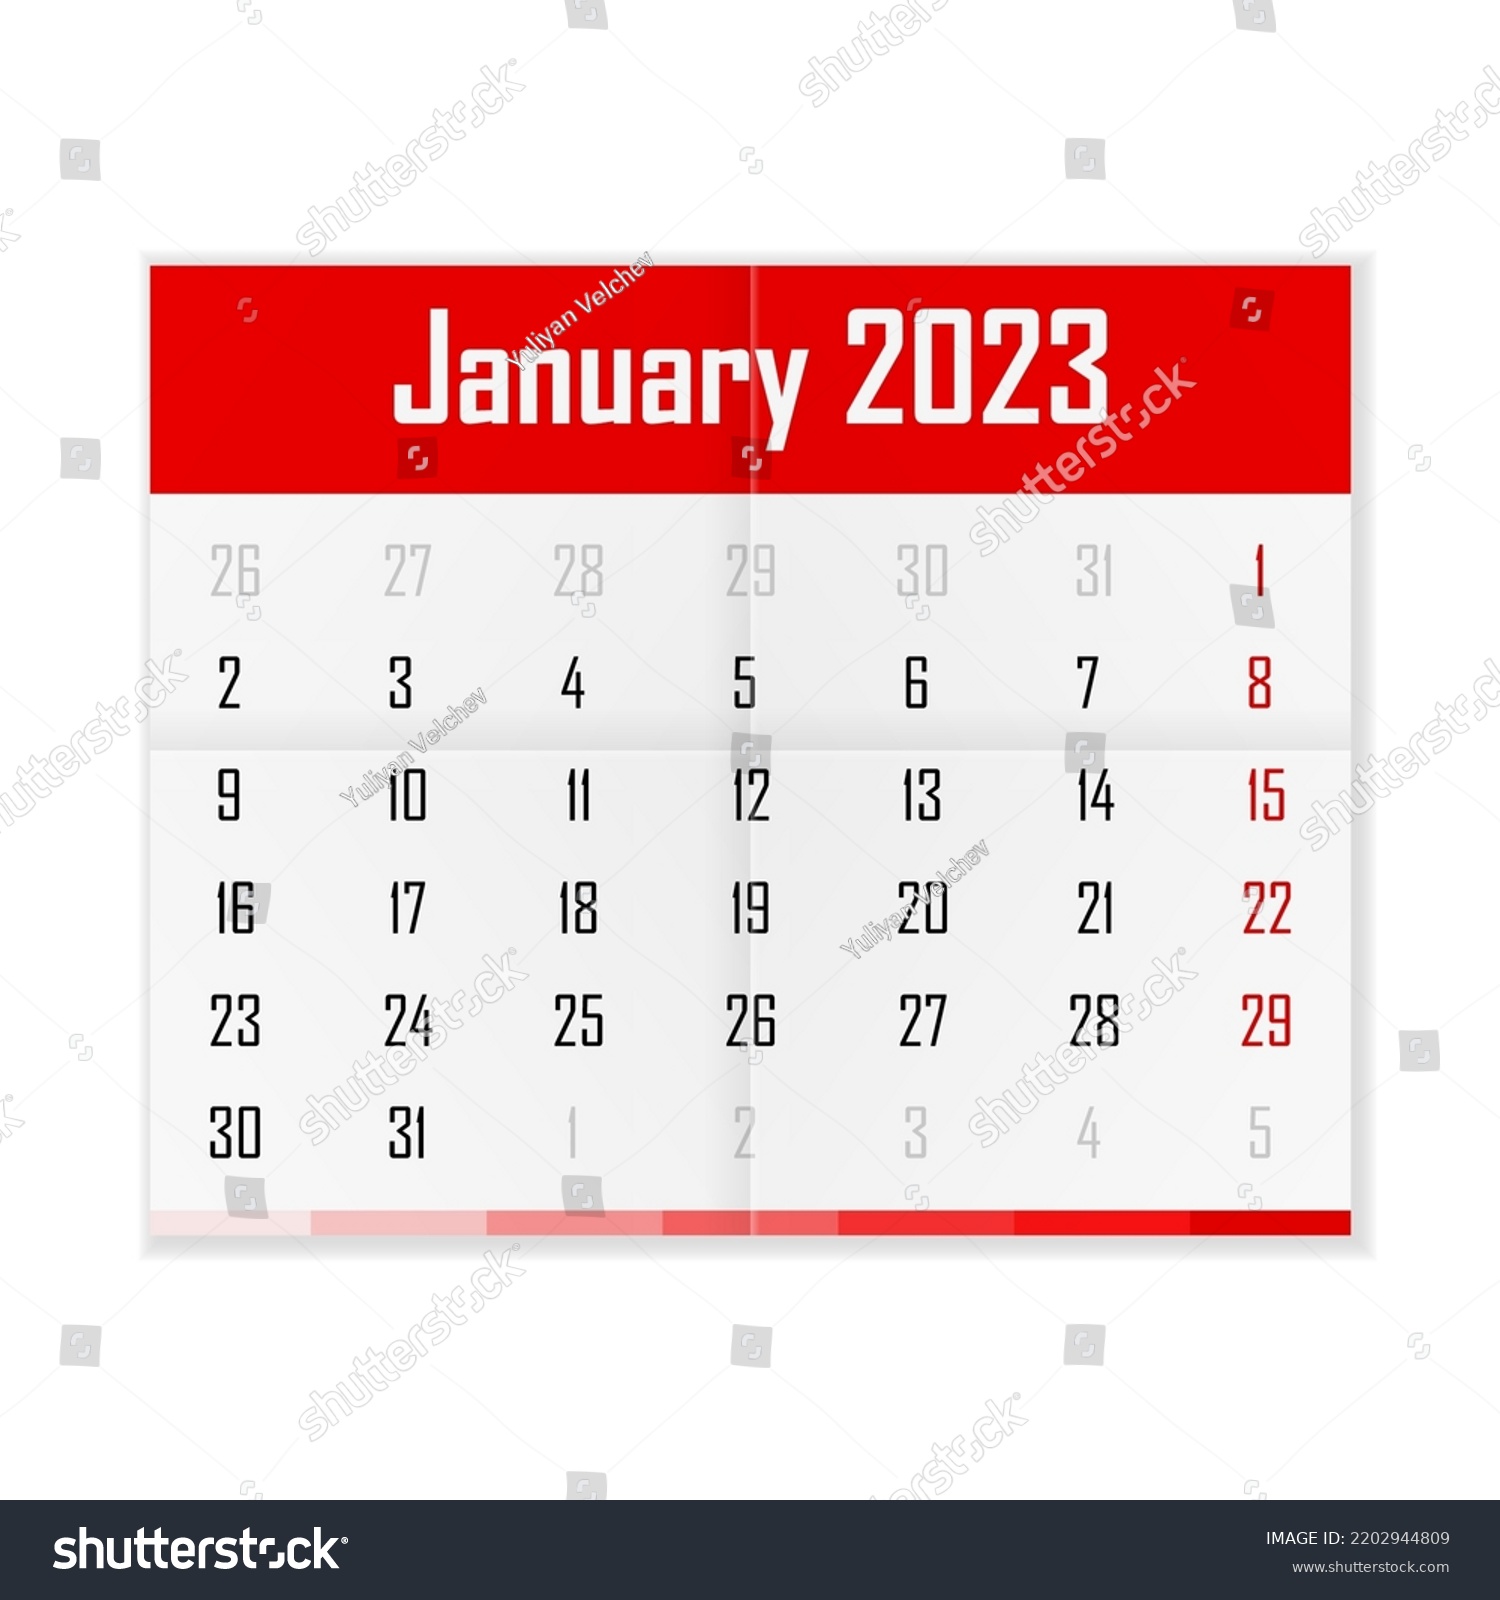 Calendar January 2023 On White Background Stock Vector (Royalty Free ...